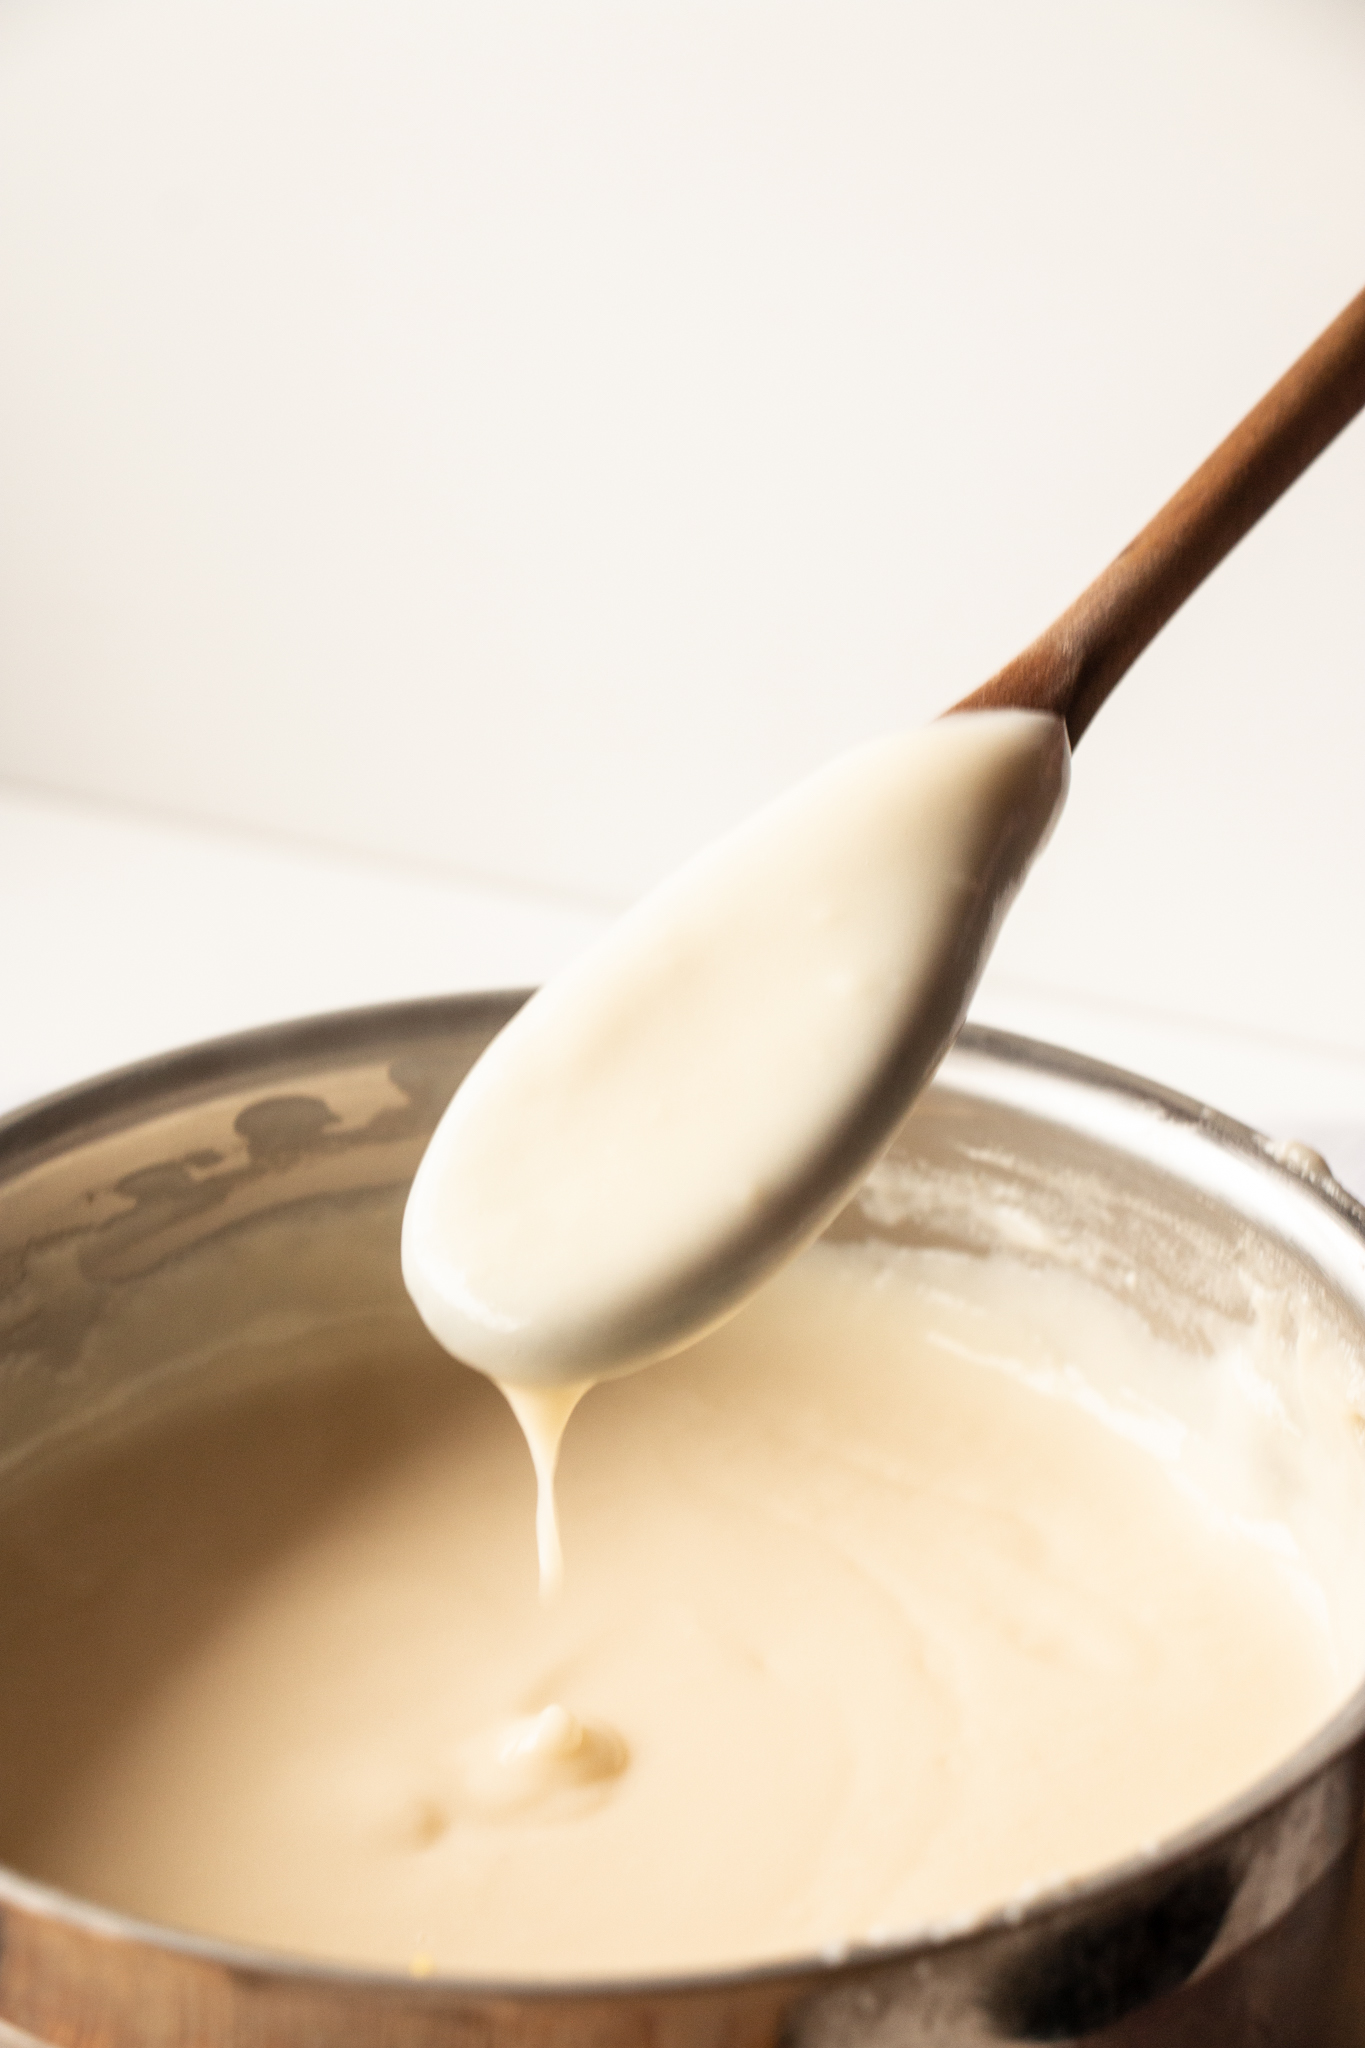 how to make a cheese sauce without cream